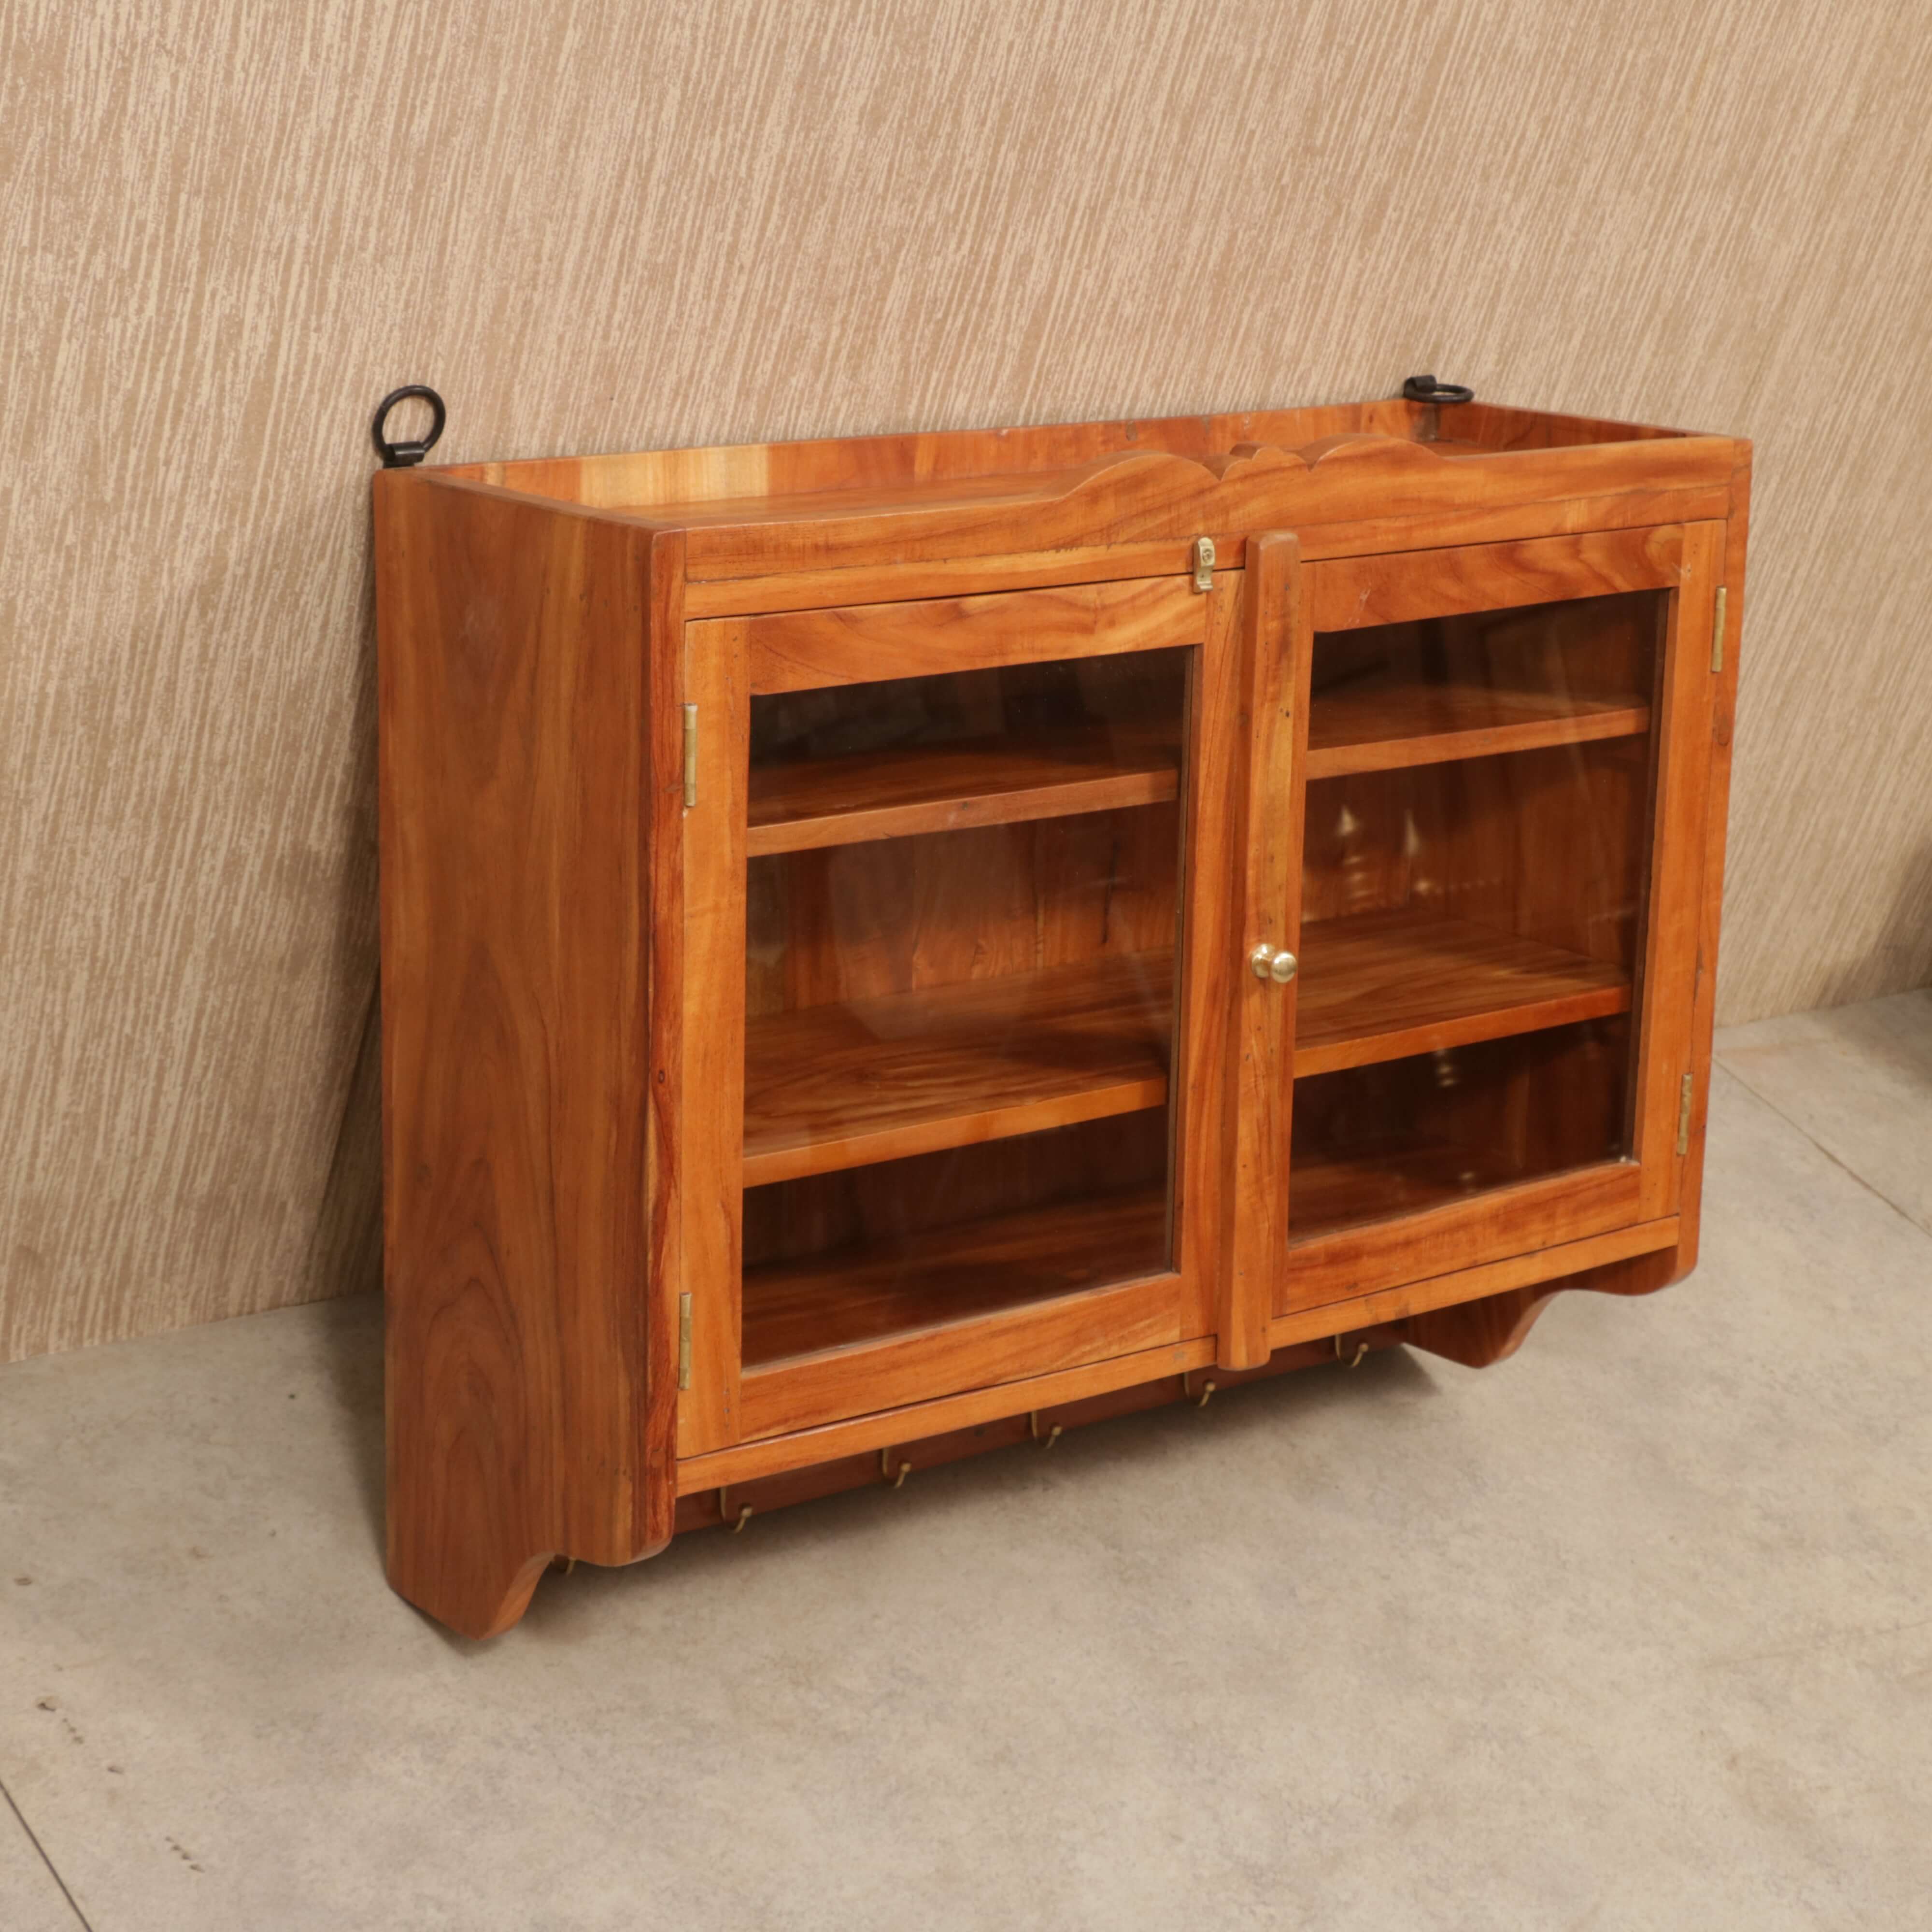 30 x 7 x 24 Inch Wide Wooden Hanging Cabinet Wall Cabinet